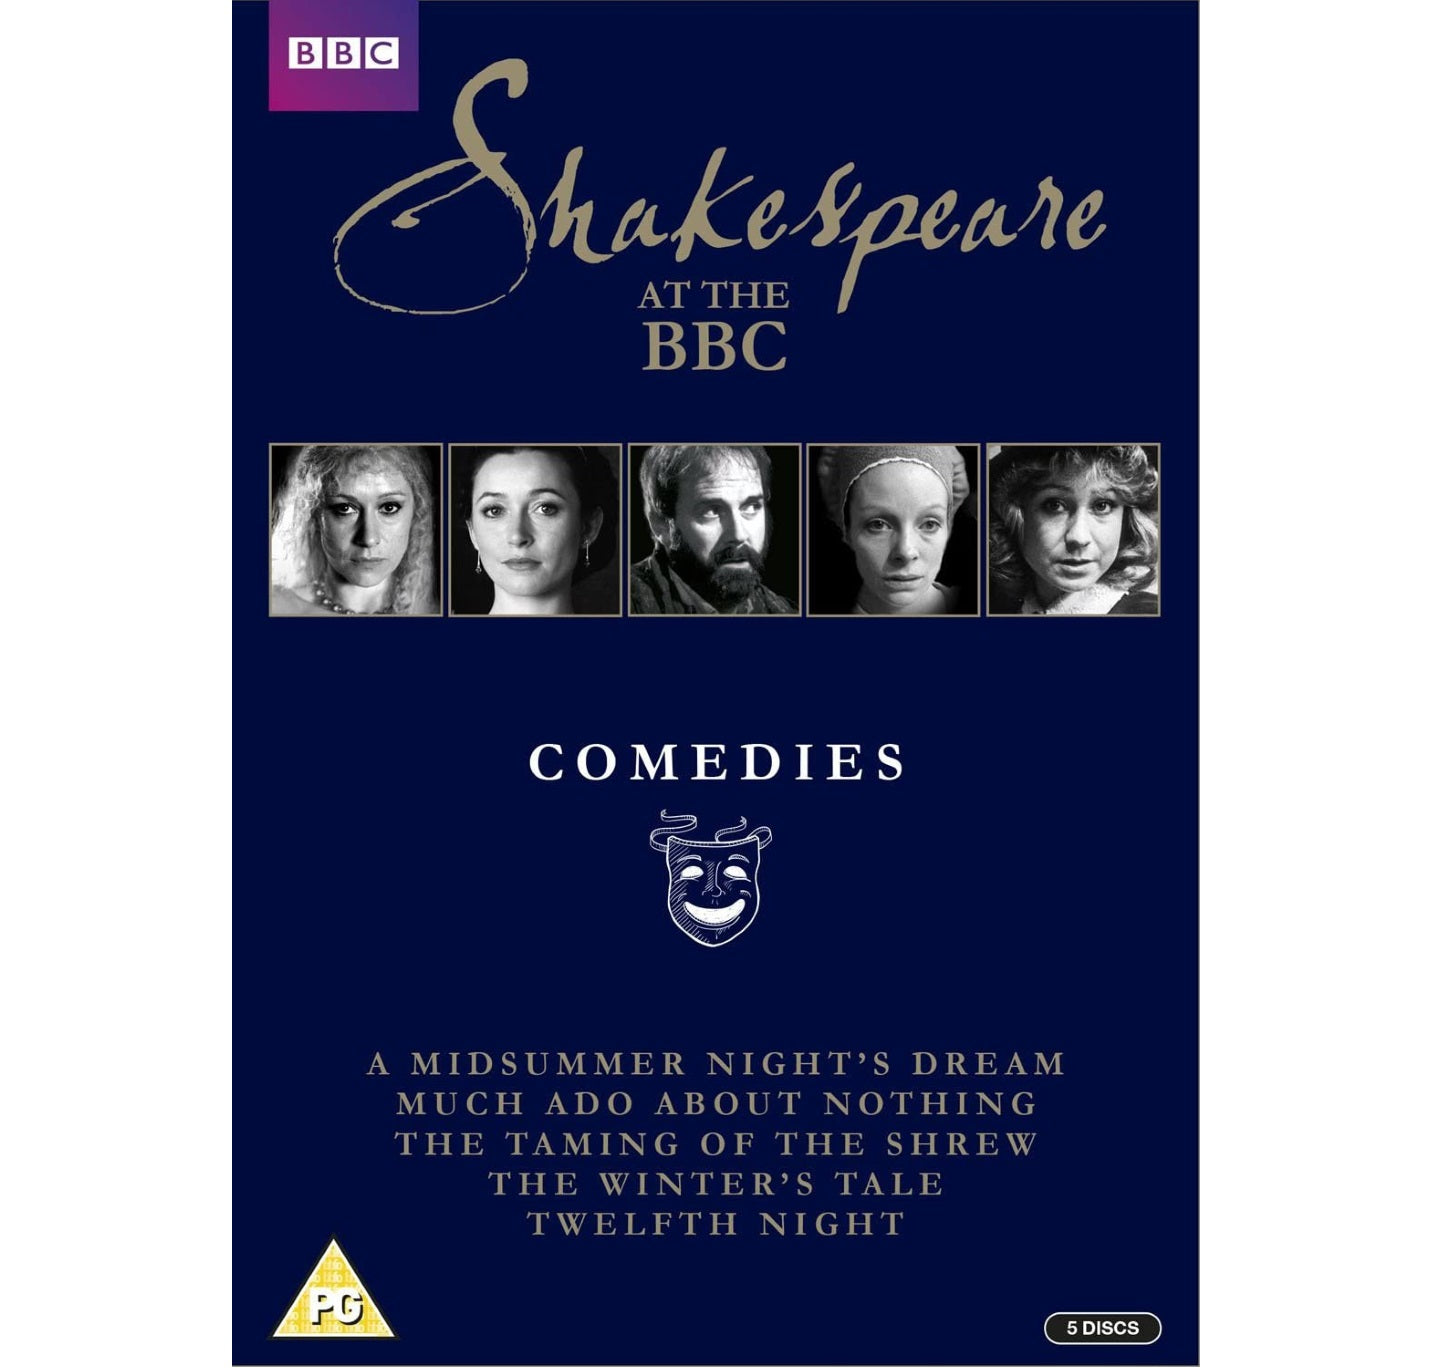 Shakespeare at the BBC - Comedies: DVD (2016)